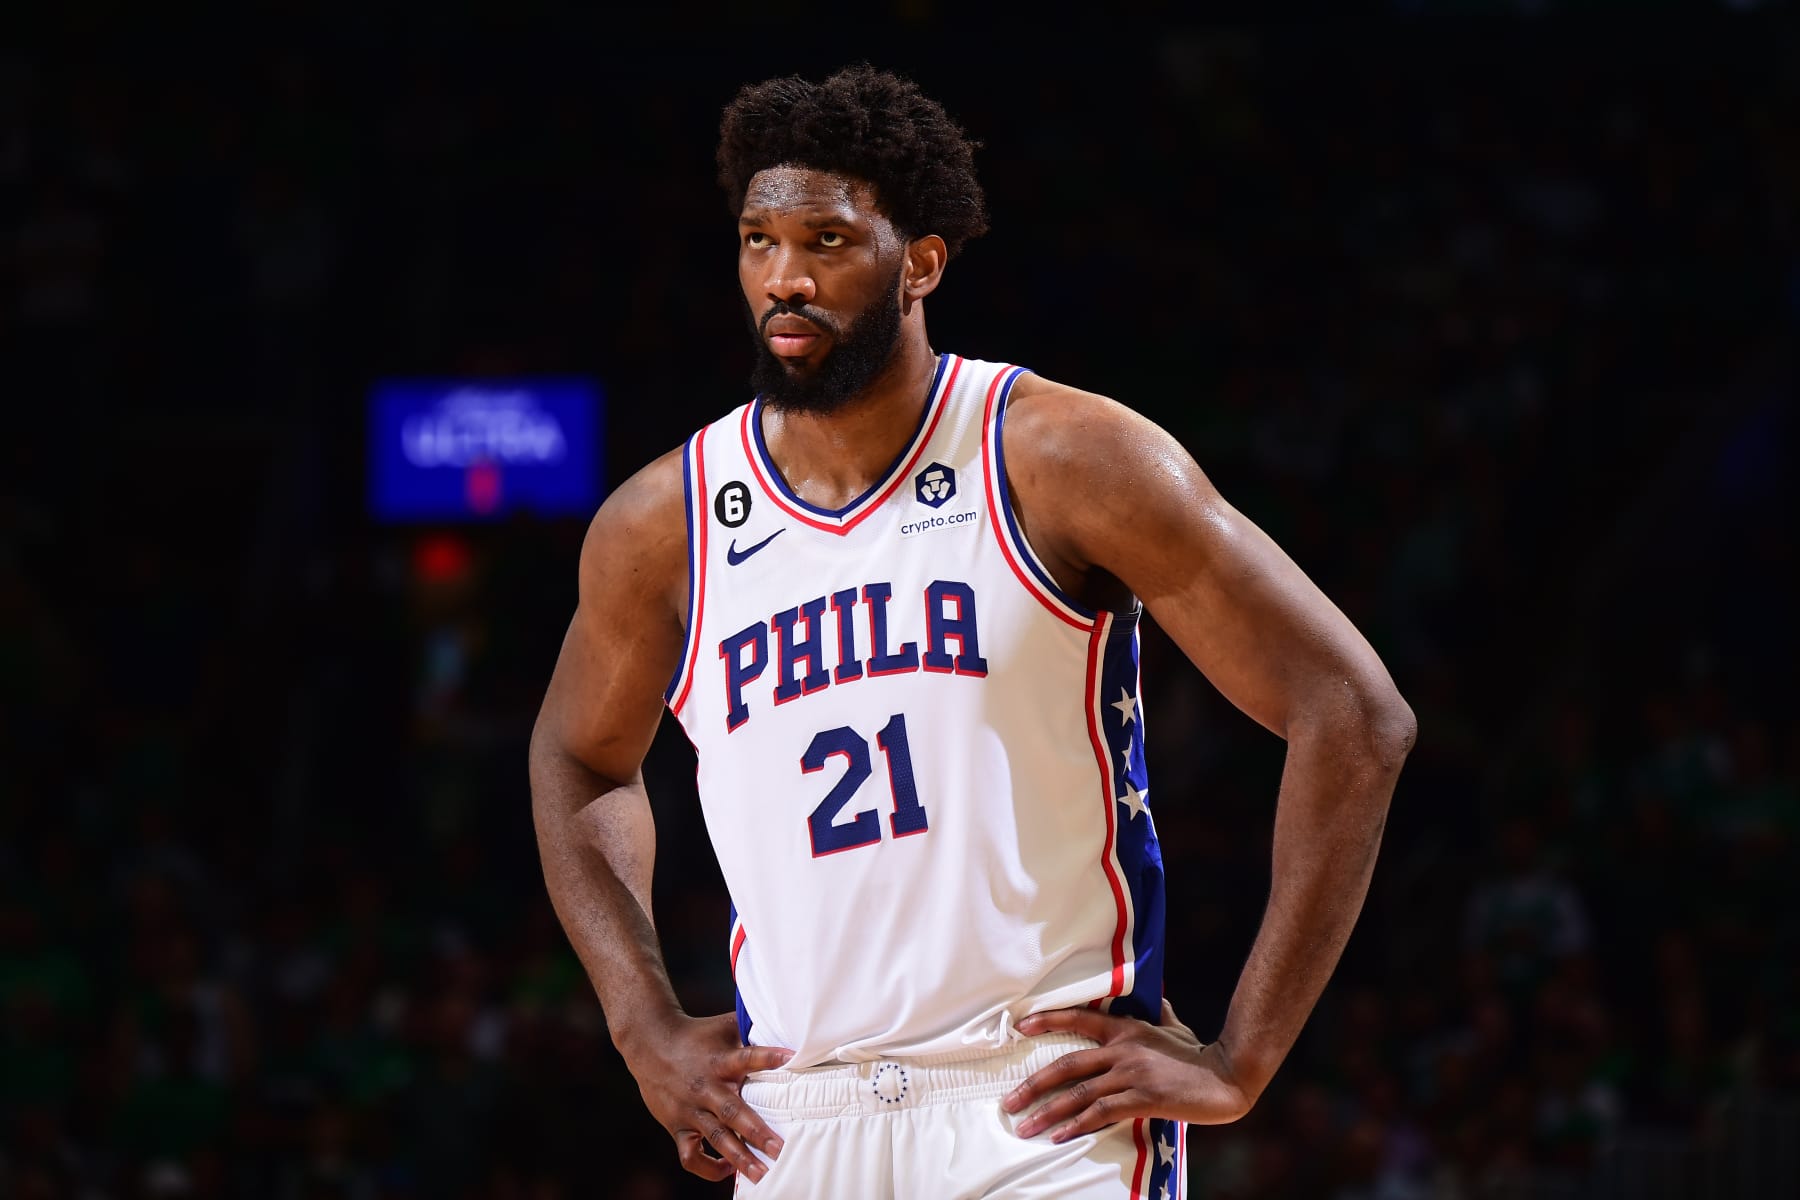 Embiid signs rookie deal with 76ers